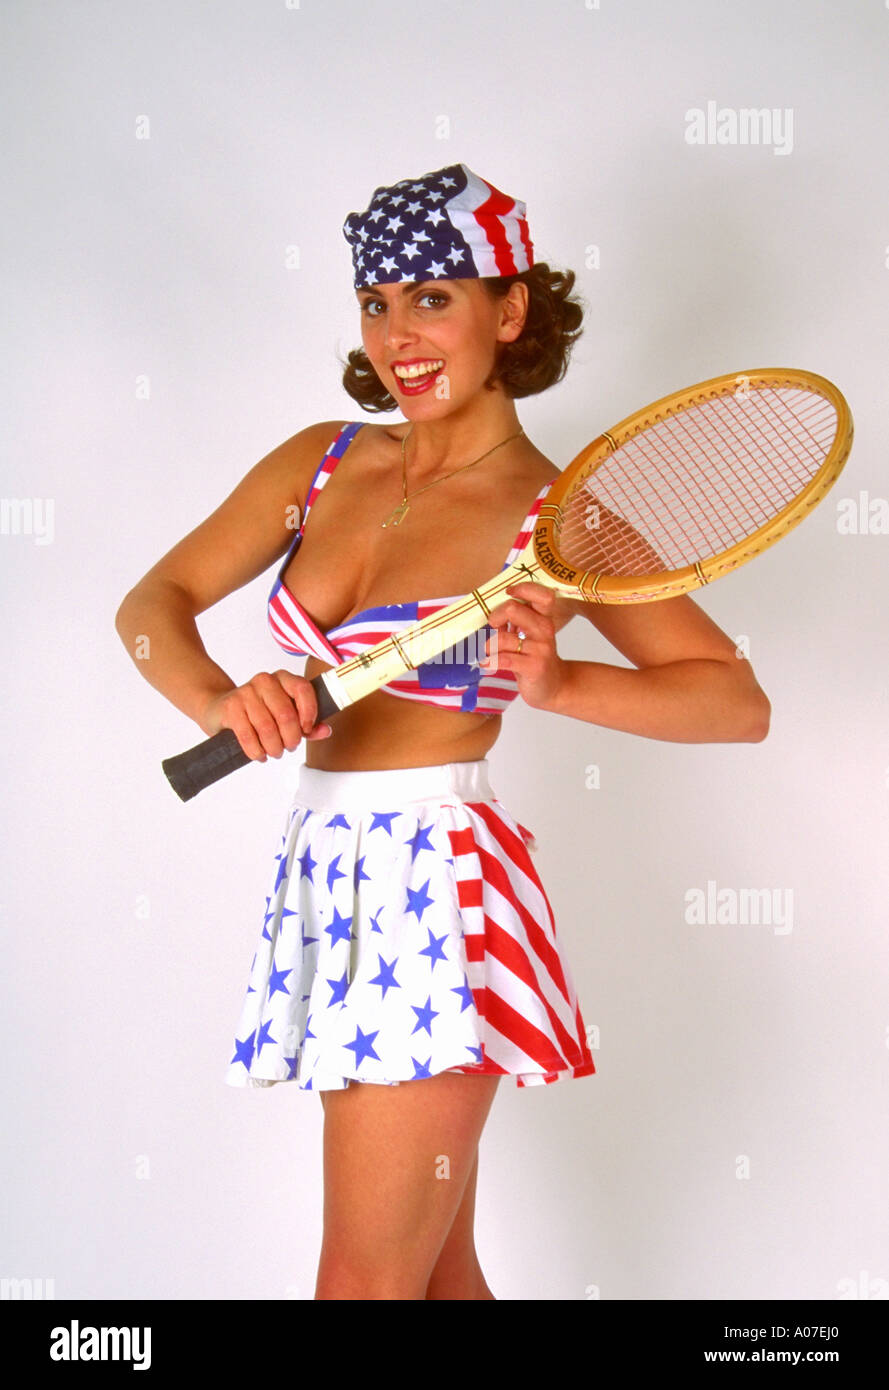 Portrait of a Young Woman in a Tennis Outfit Holding a Tennis Racket Stock Photo